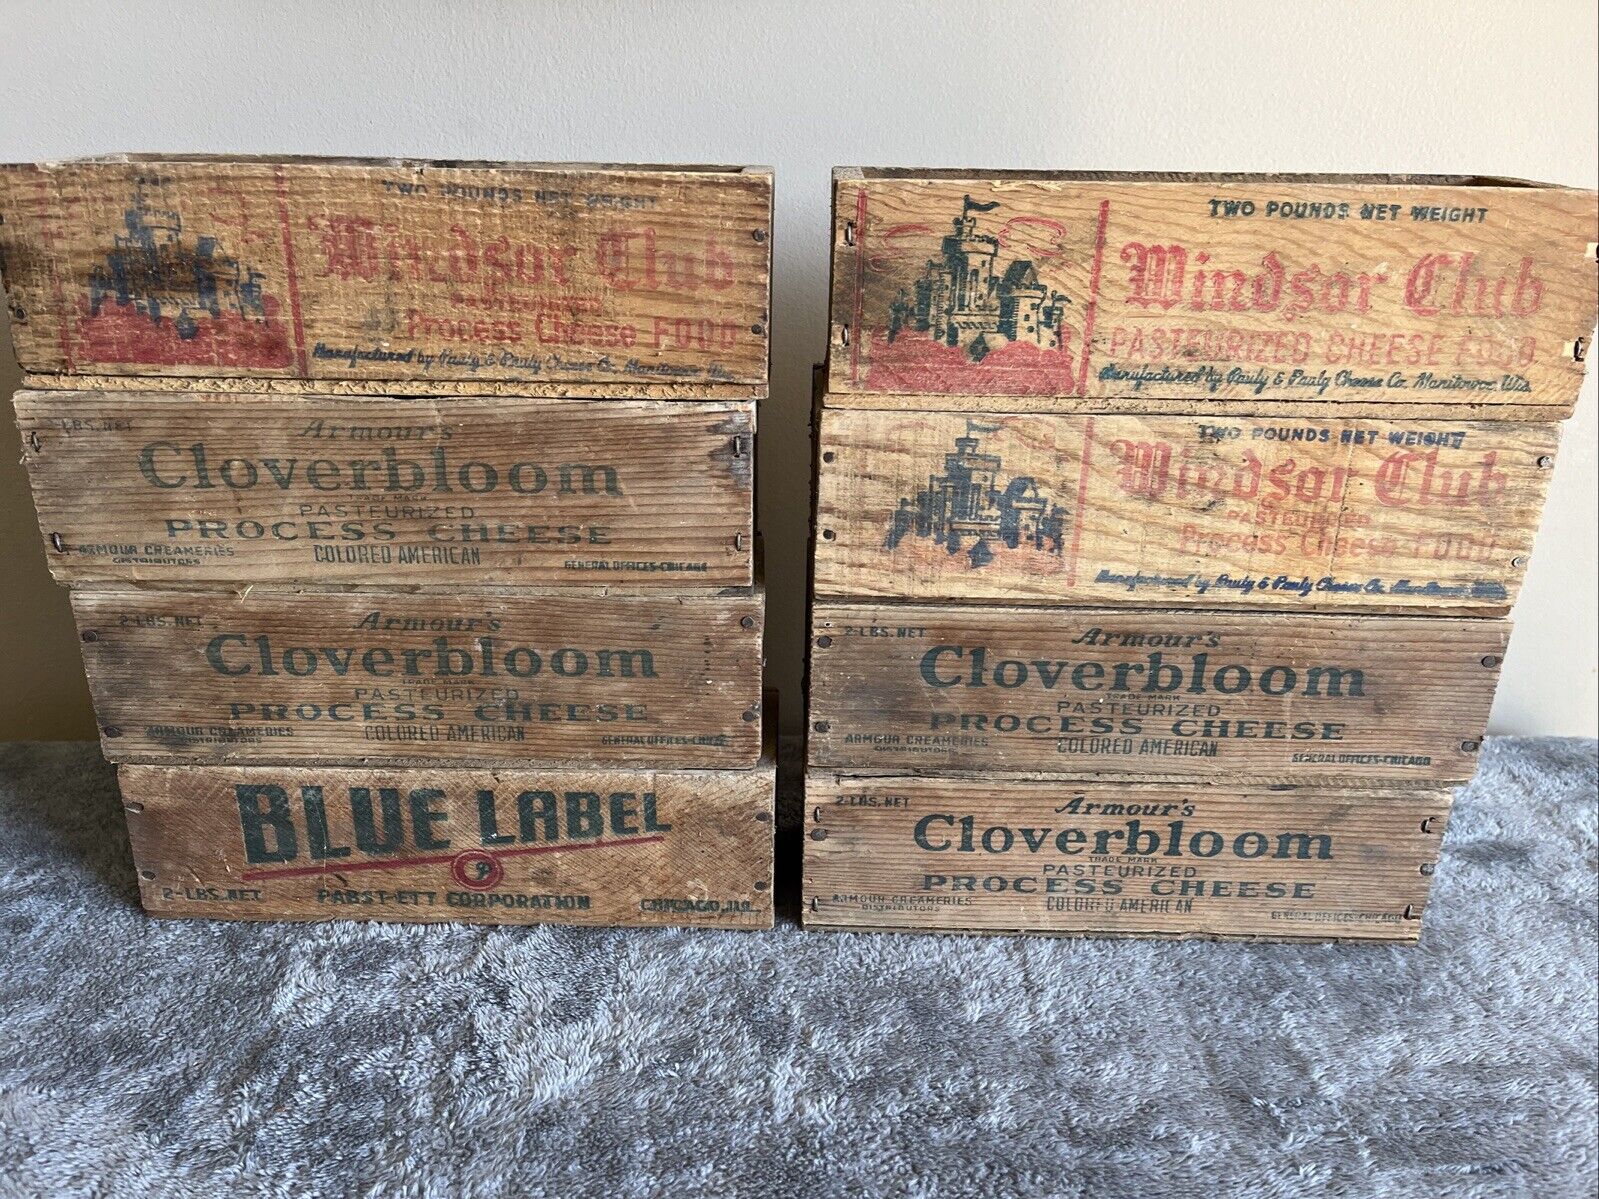 LOT OF 8 VINTAGE WOODEN CHEESE BOXES WINDSOR,CLOVERBLOOM Blue Label